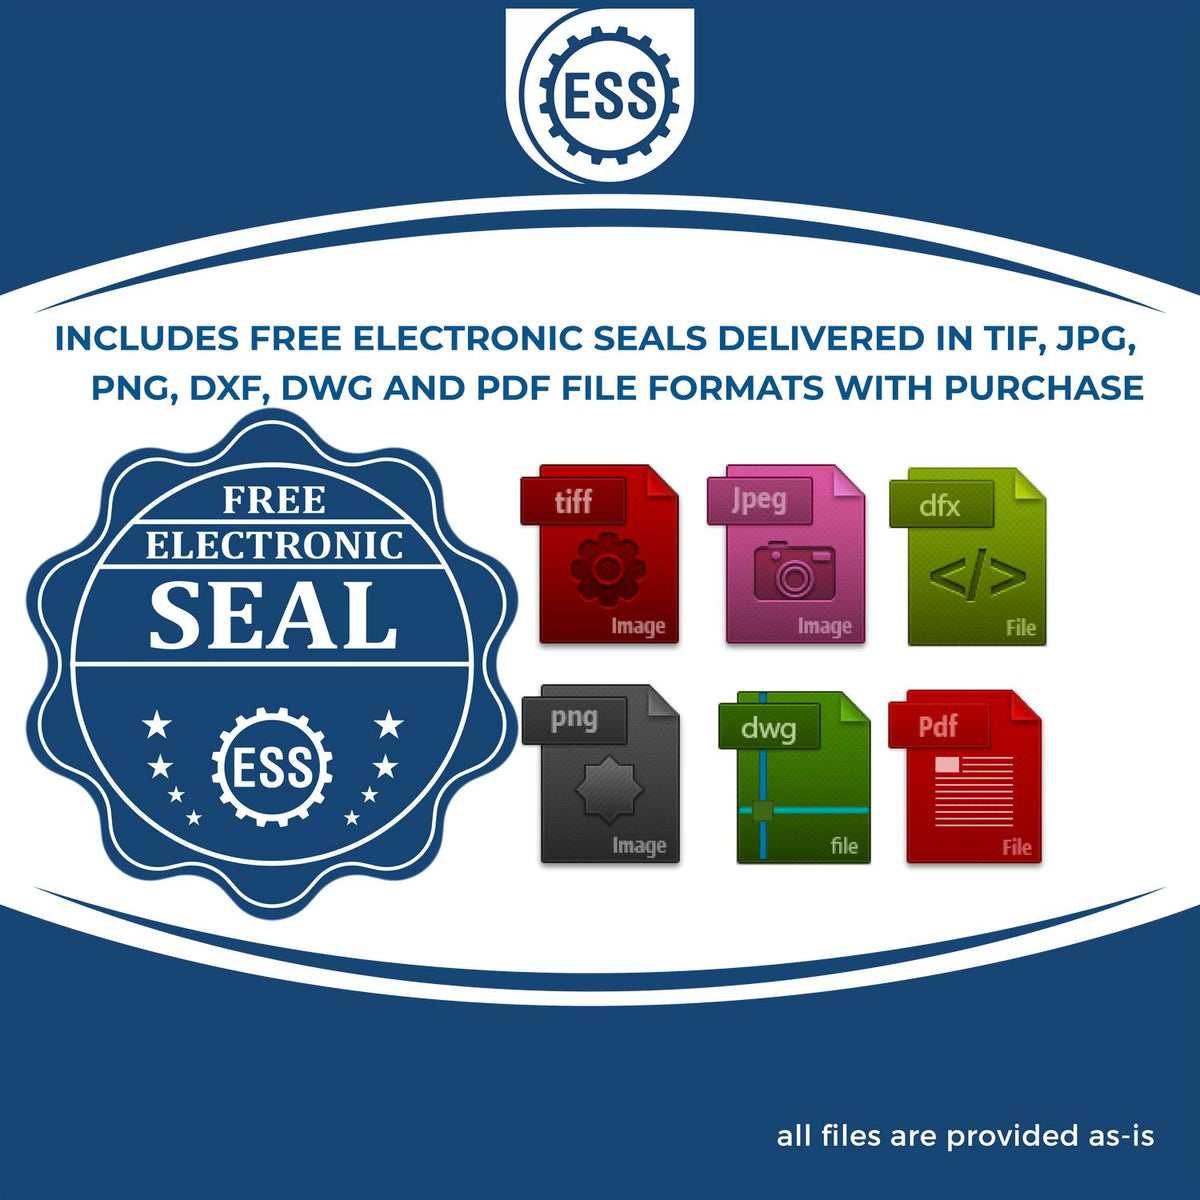 An infographic for the free electronic seal for the Idaho Professional Engineer Seal Stamp illustrating the different file type icons such as DXF, DWG, TIF, JPG and PNG.